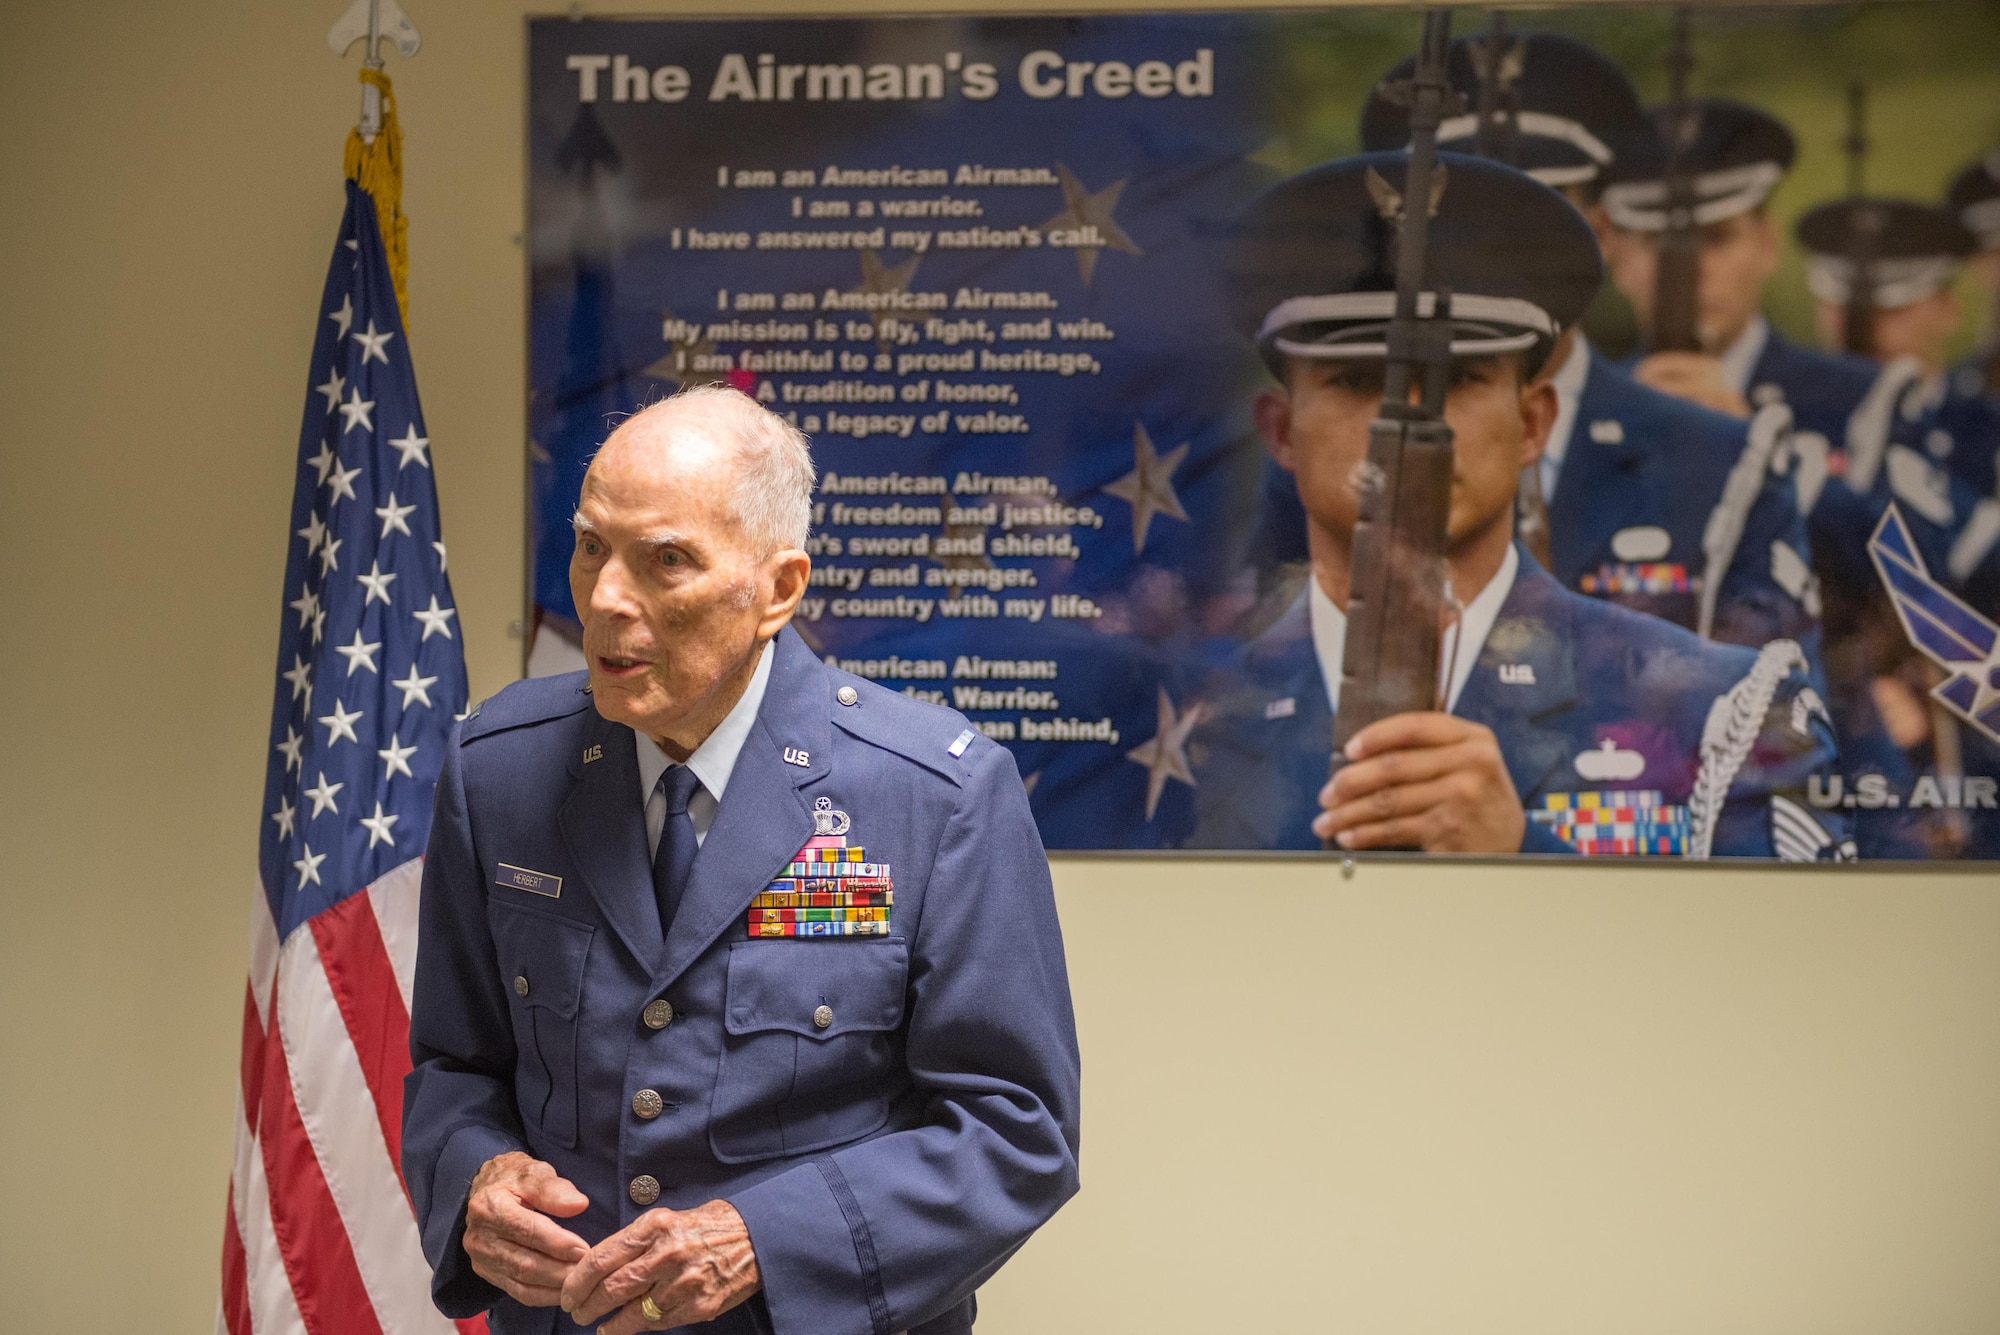 Retired Chief Warrant Officer 4 Francis Herbert delivers remarks during a room dedication ceremony in his honor in Cody Hall April 26, 2016, Keesler Air Force Base, Miss. The room was dedicated to him for his 50 years of service in air traffic control in the Army, Army Air Corps, and Air Force from 1942-1972 then as a Keesler civilian instructor for 20 years. (U.S. Air Force photo by Marie Floyd)